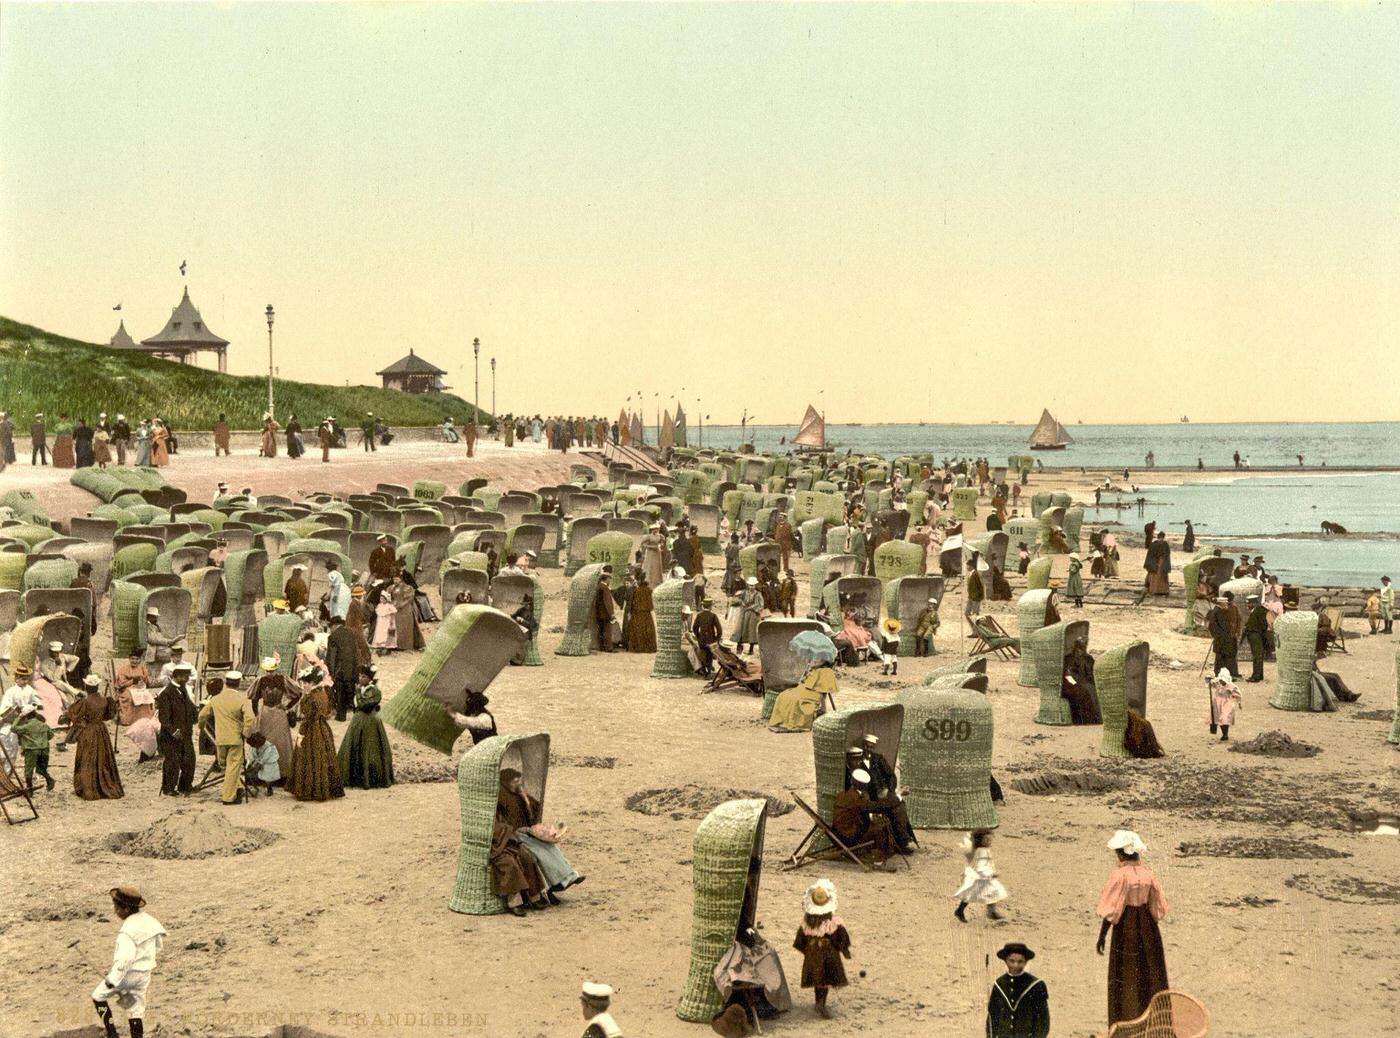 Beach scene in Norderney, Germany, late 19th century.